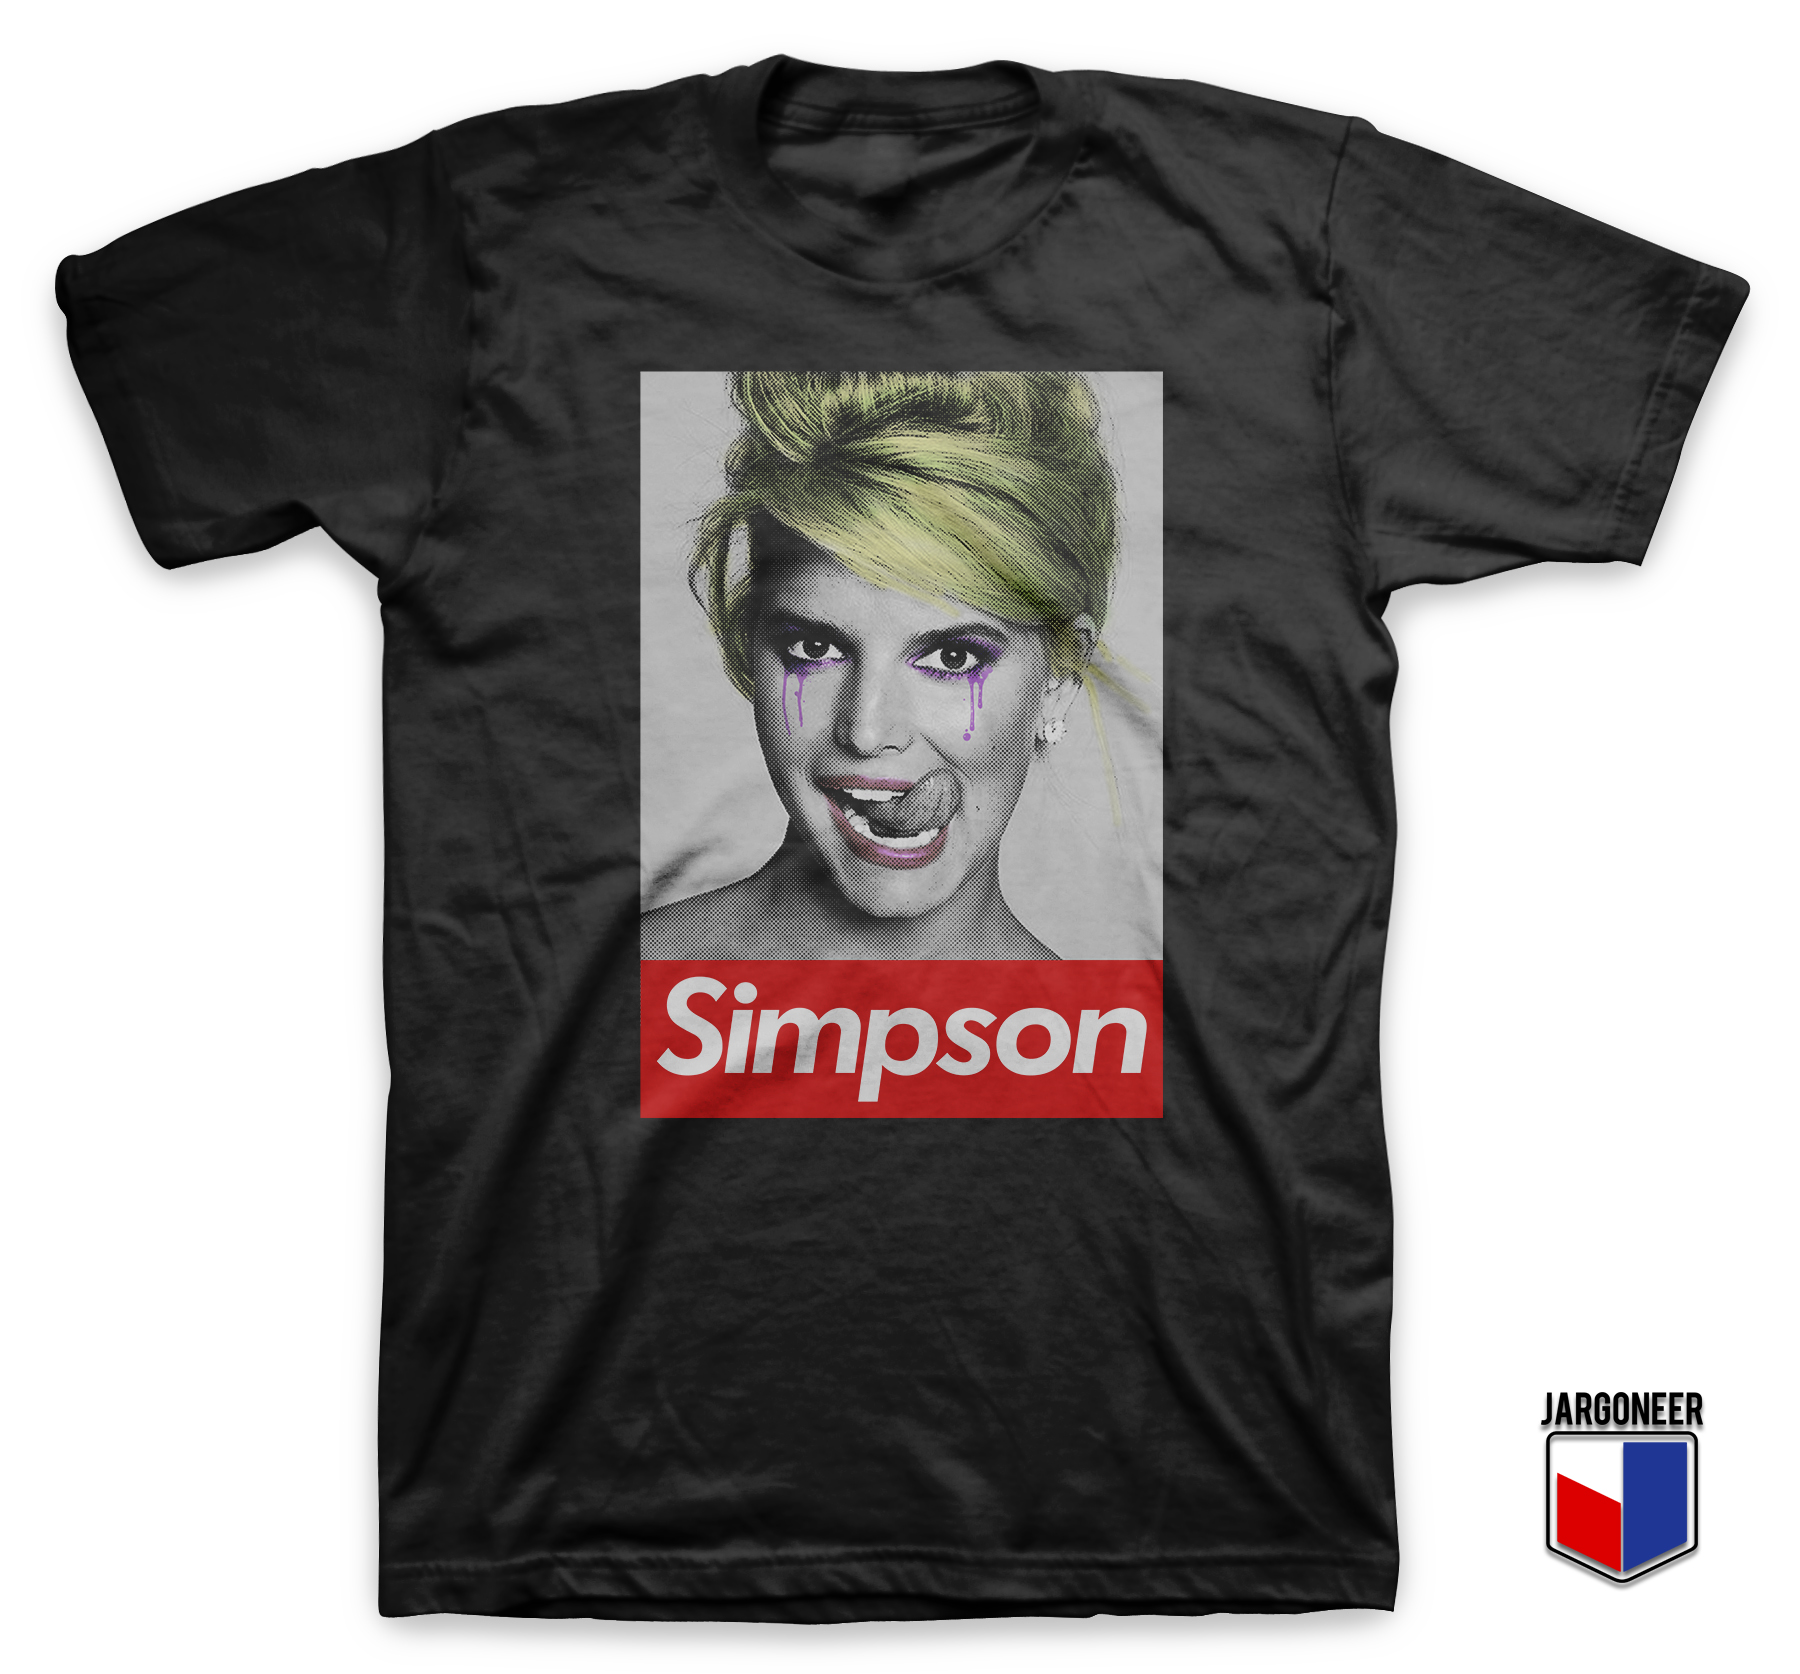 Jessica Simpson Sweetest Girl In The Universe Black T Shirt - Shop Unique Graphic Cool Shirt Designs